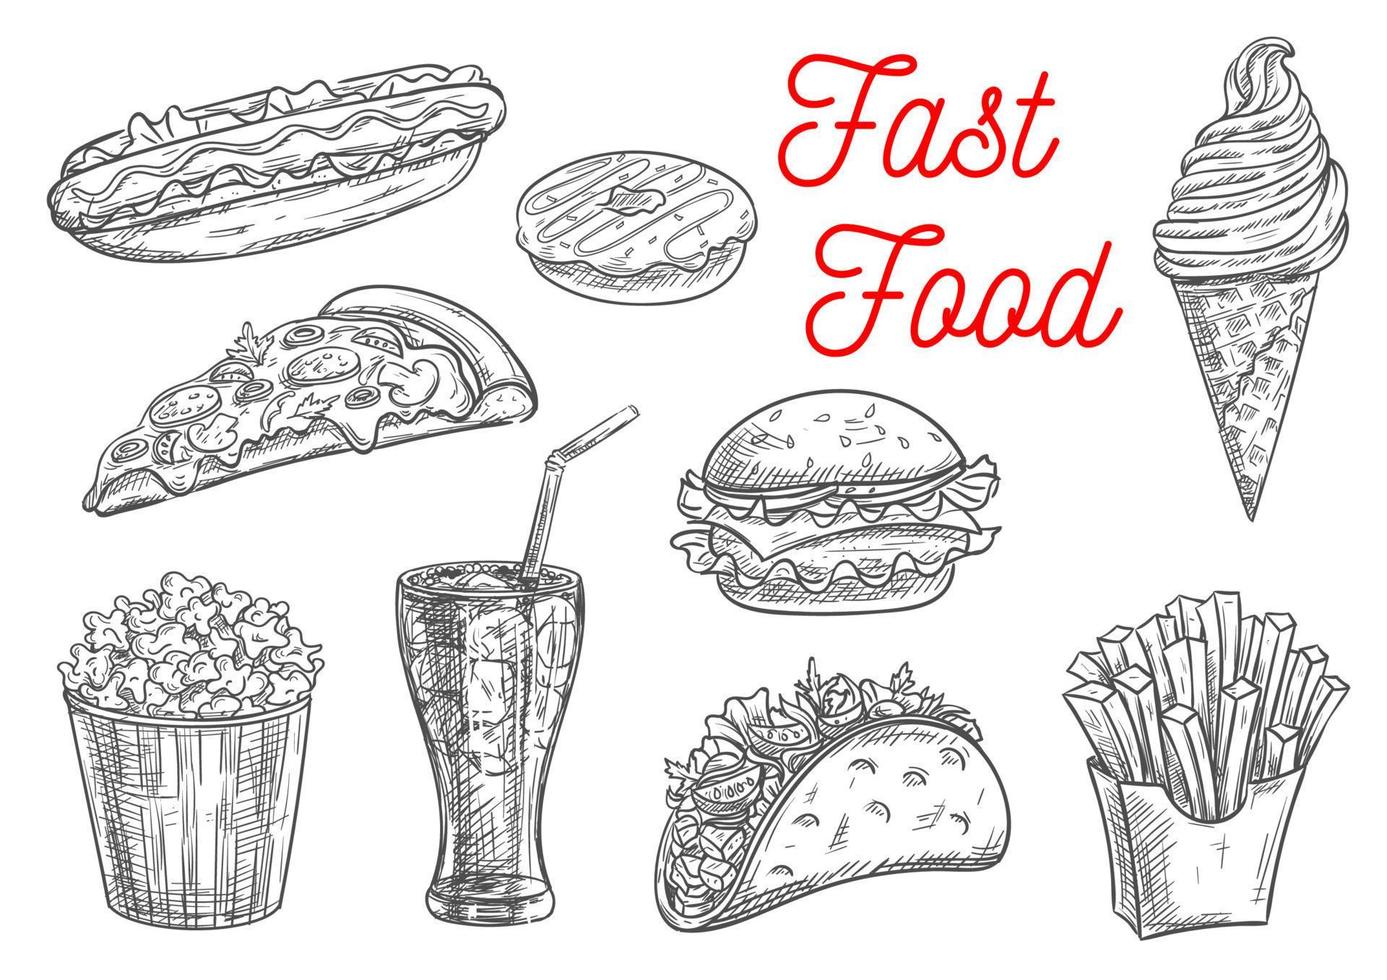 Fast food snacks and drinks icons sketch vector